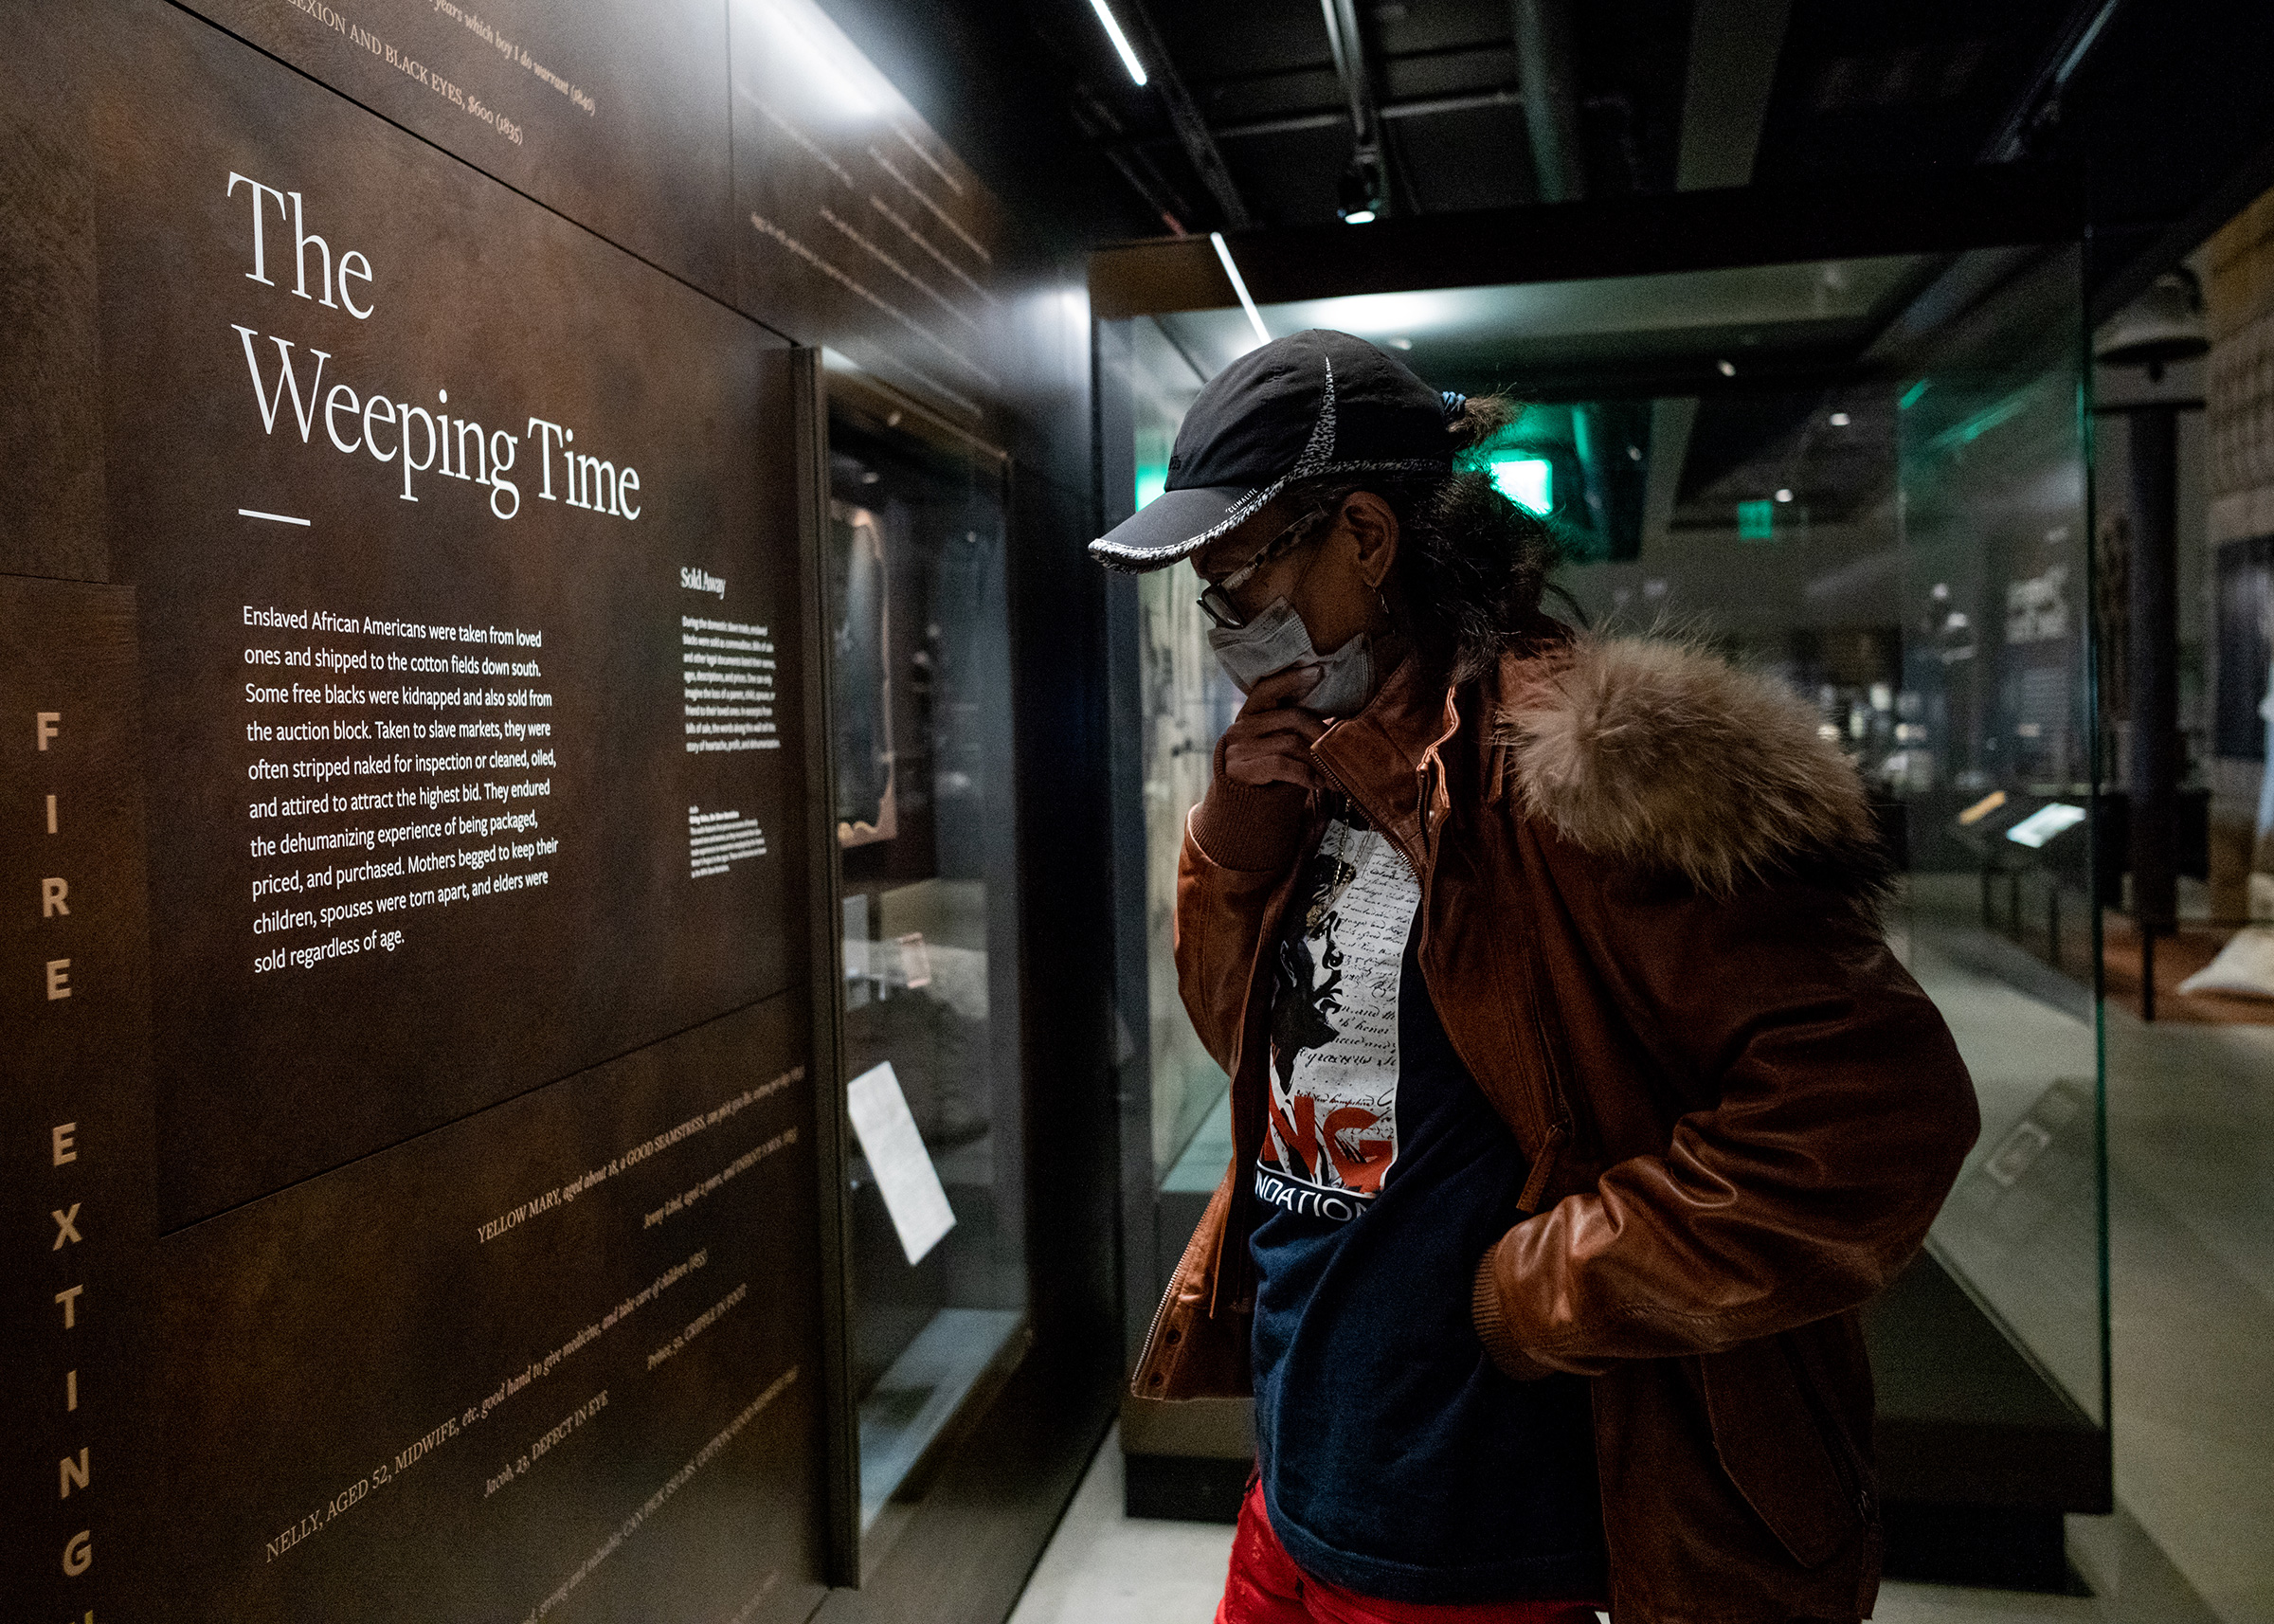 Dennetta King, ex-wife of Rodney King standsless than three feet away from a section of an auction block as she toured the National Museum of African American History and Culture